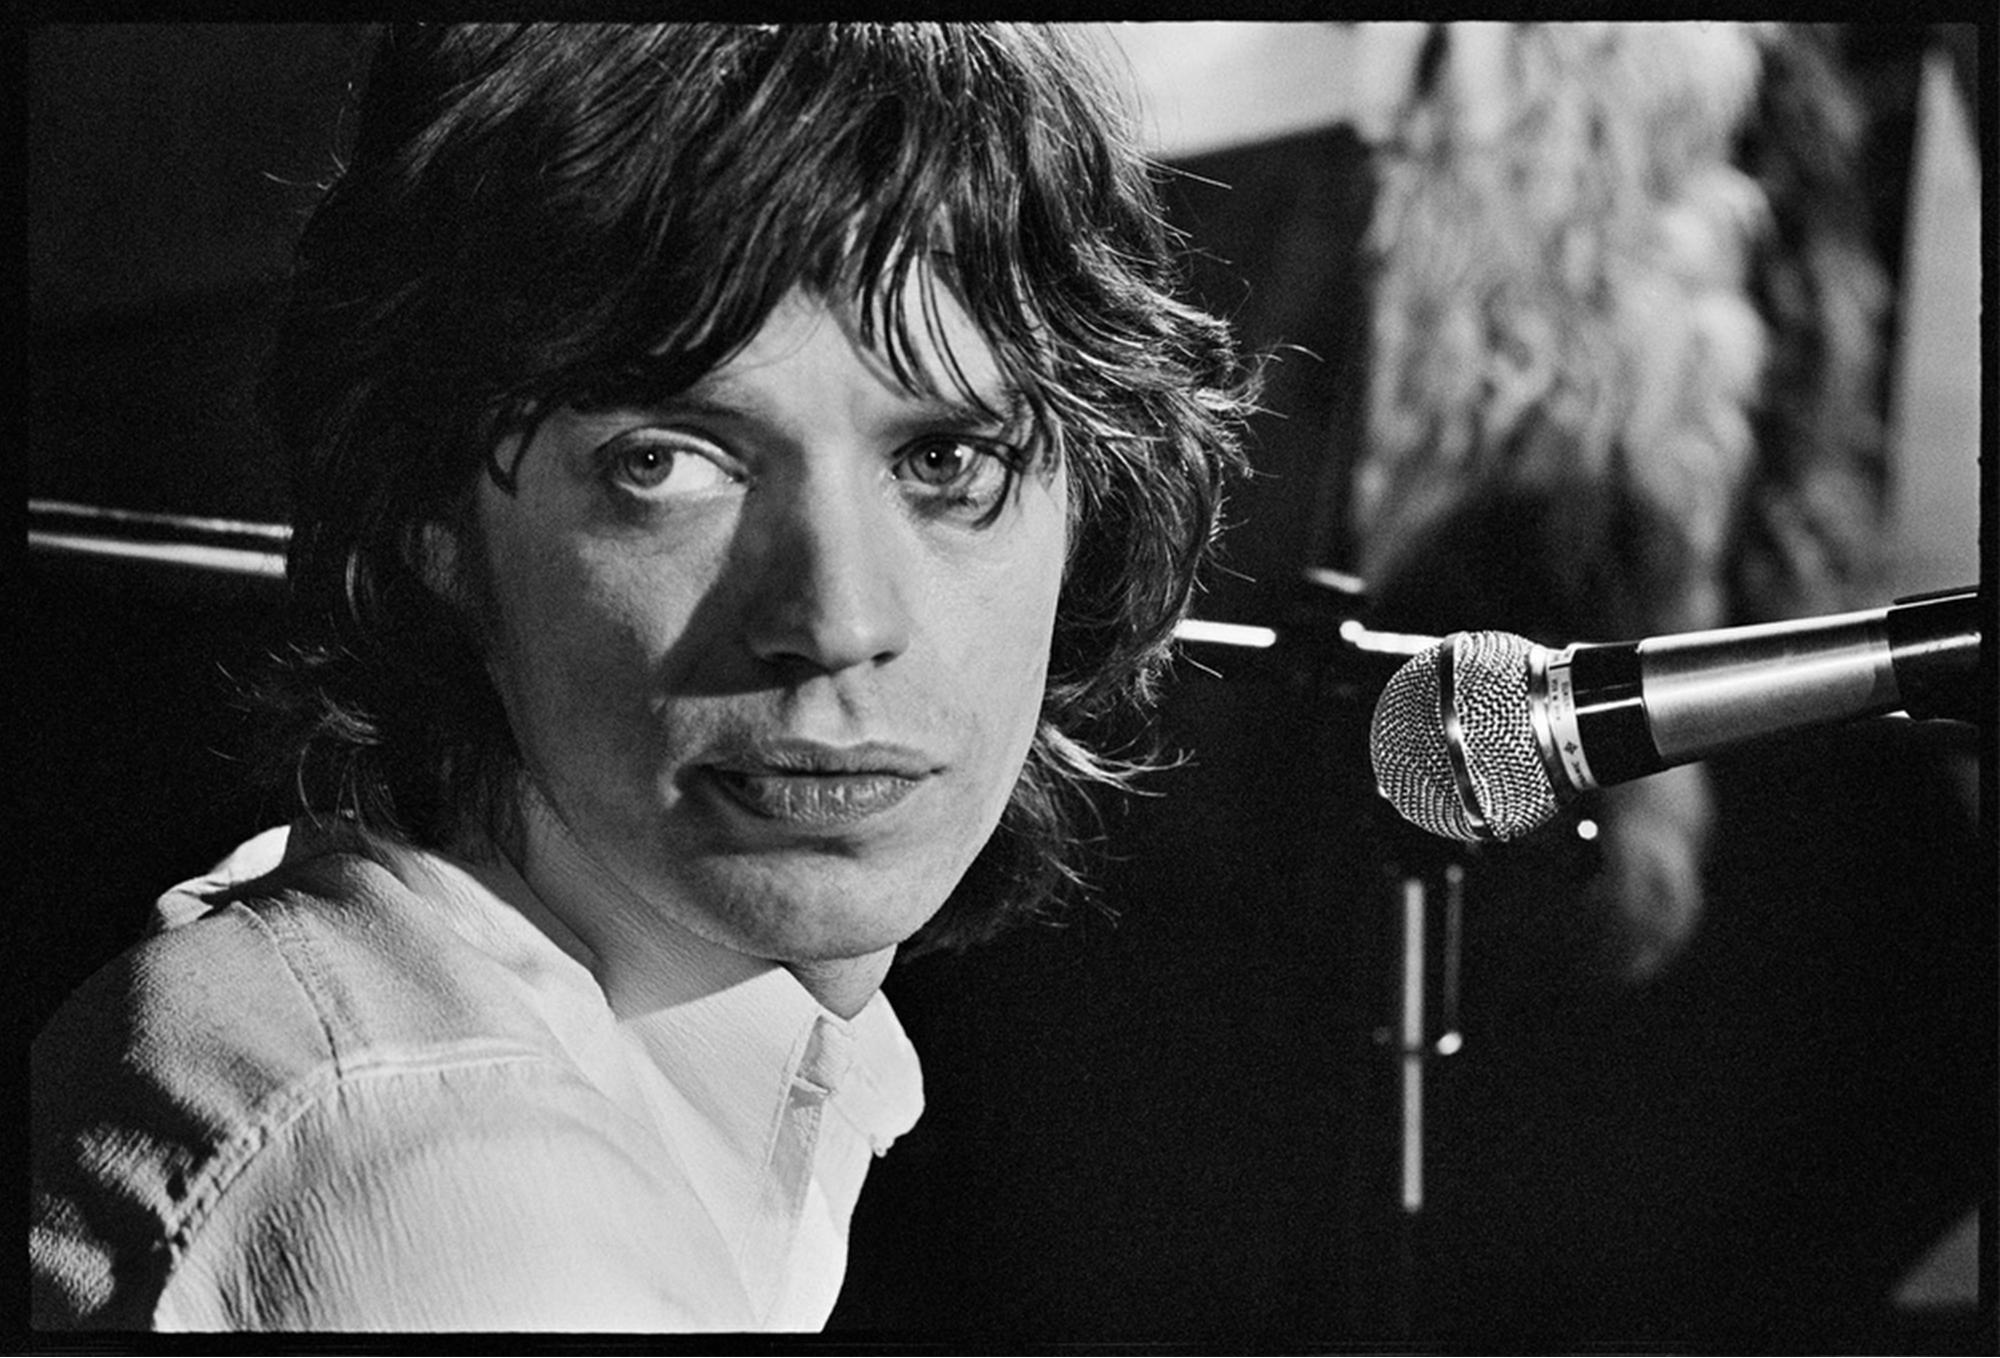 Mick Jagger, Marquee Sound Check, London 1971